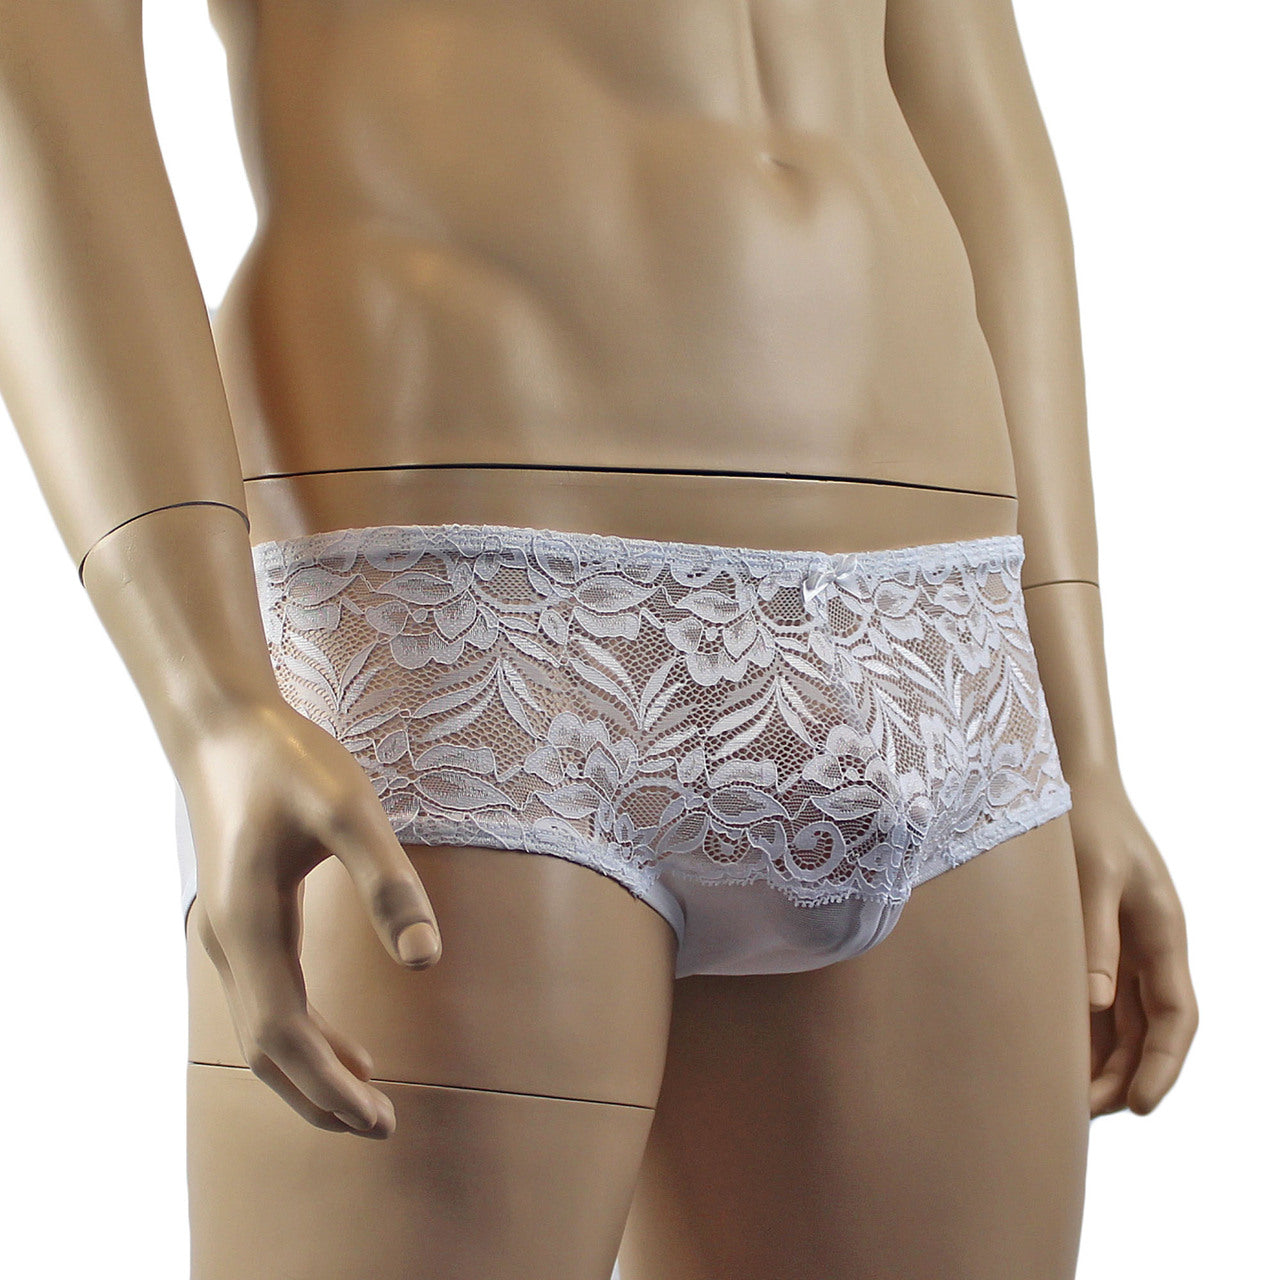 Mens Kristy Lingerie Sexy Lace and Mesh Panty Brief White